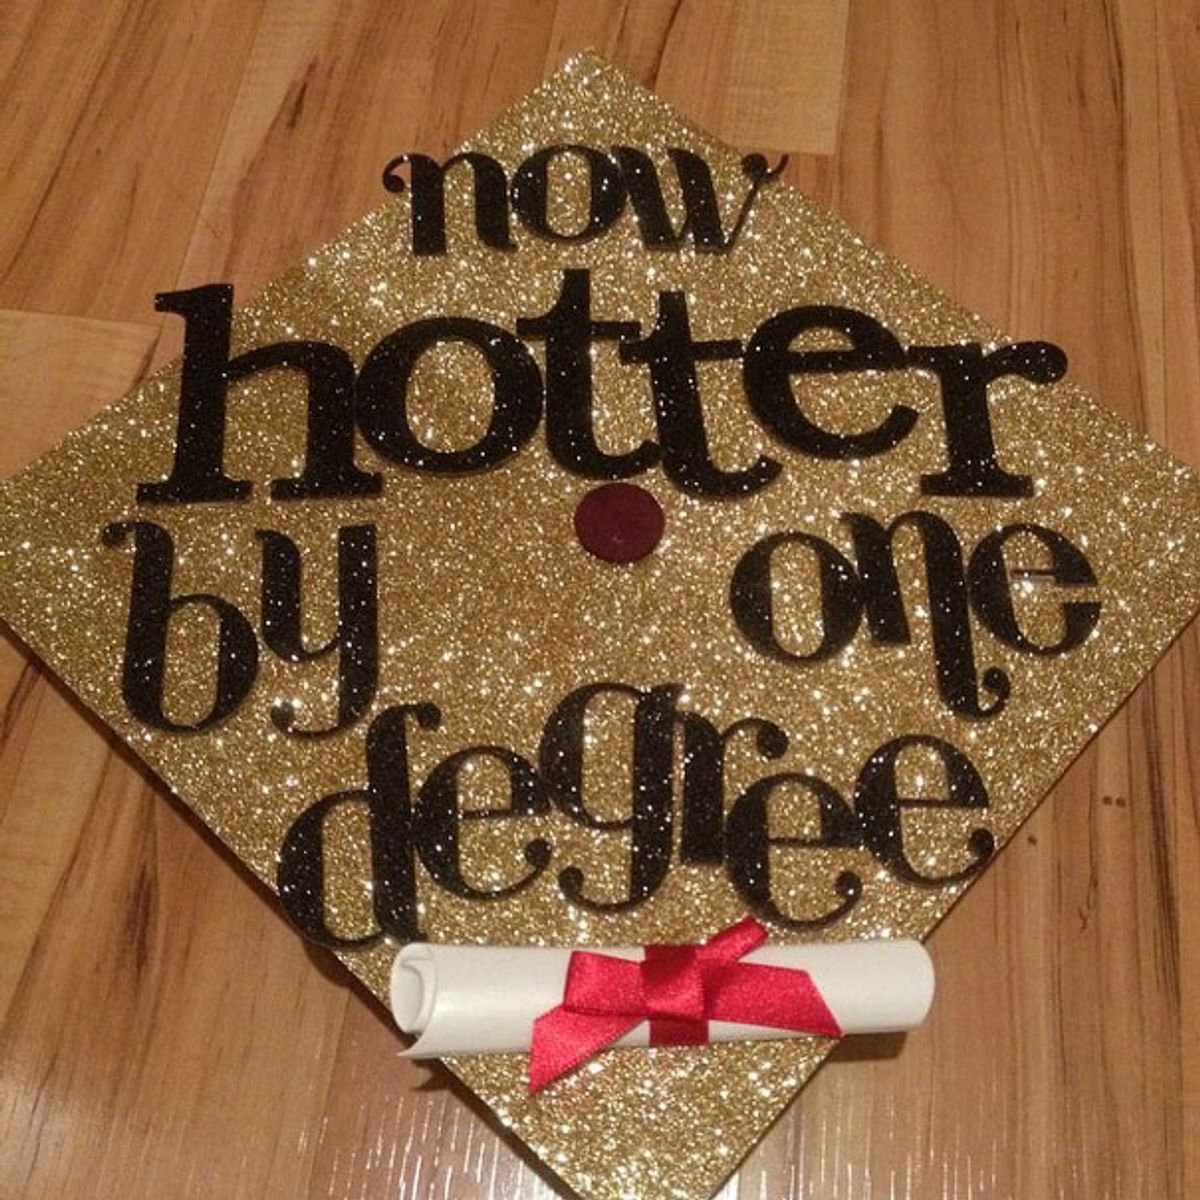 8 Reasons Why I Can't WAIT To Graduate College